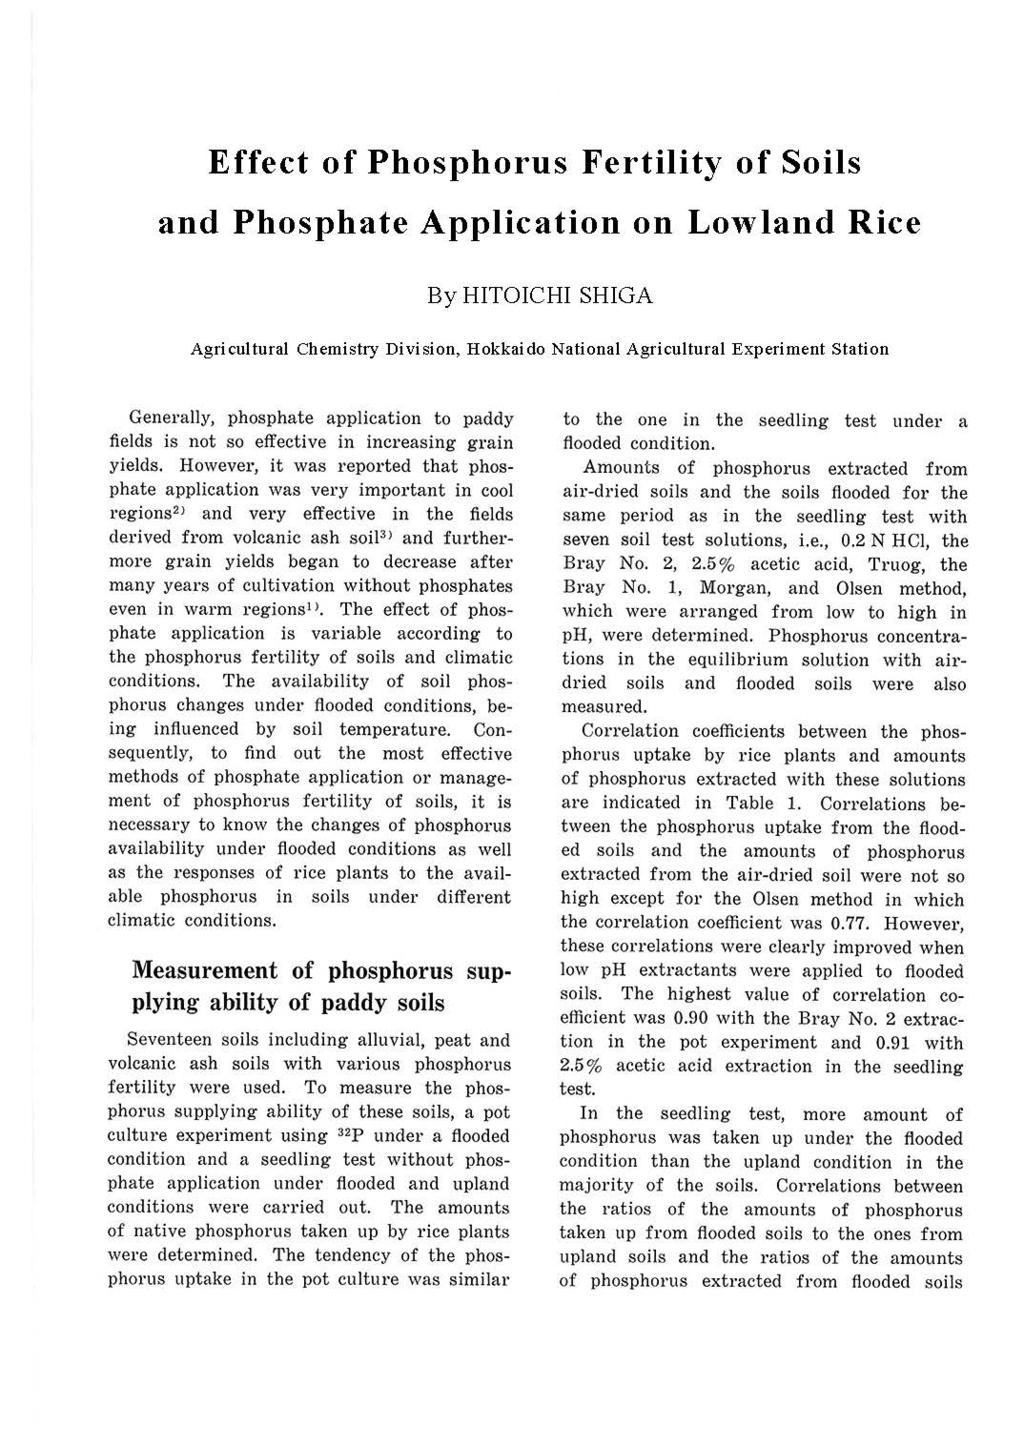 Effect of Phosphorus Fertility of Soils and Phosphate Application on Lowland Rice By HTOCH SHGA Agricultural Chemistry Division, Hokkaido National Agricultural Experiment Station Generally, phosphate